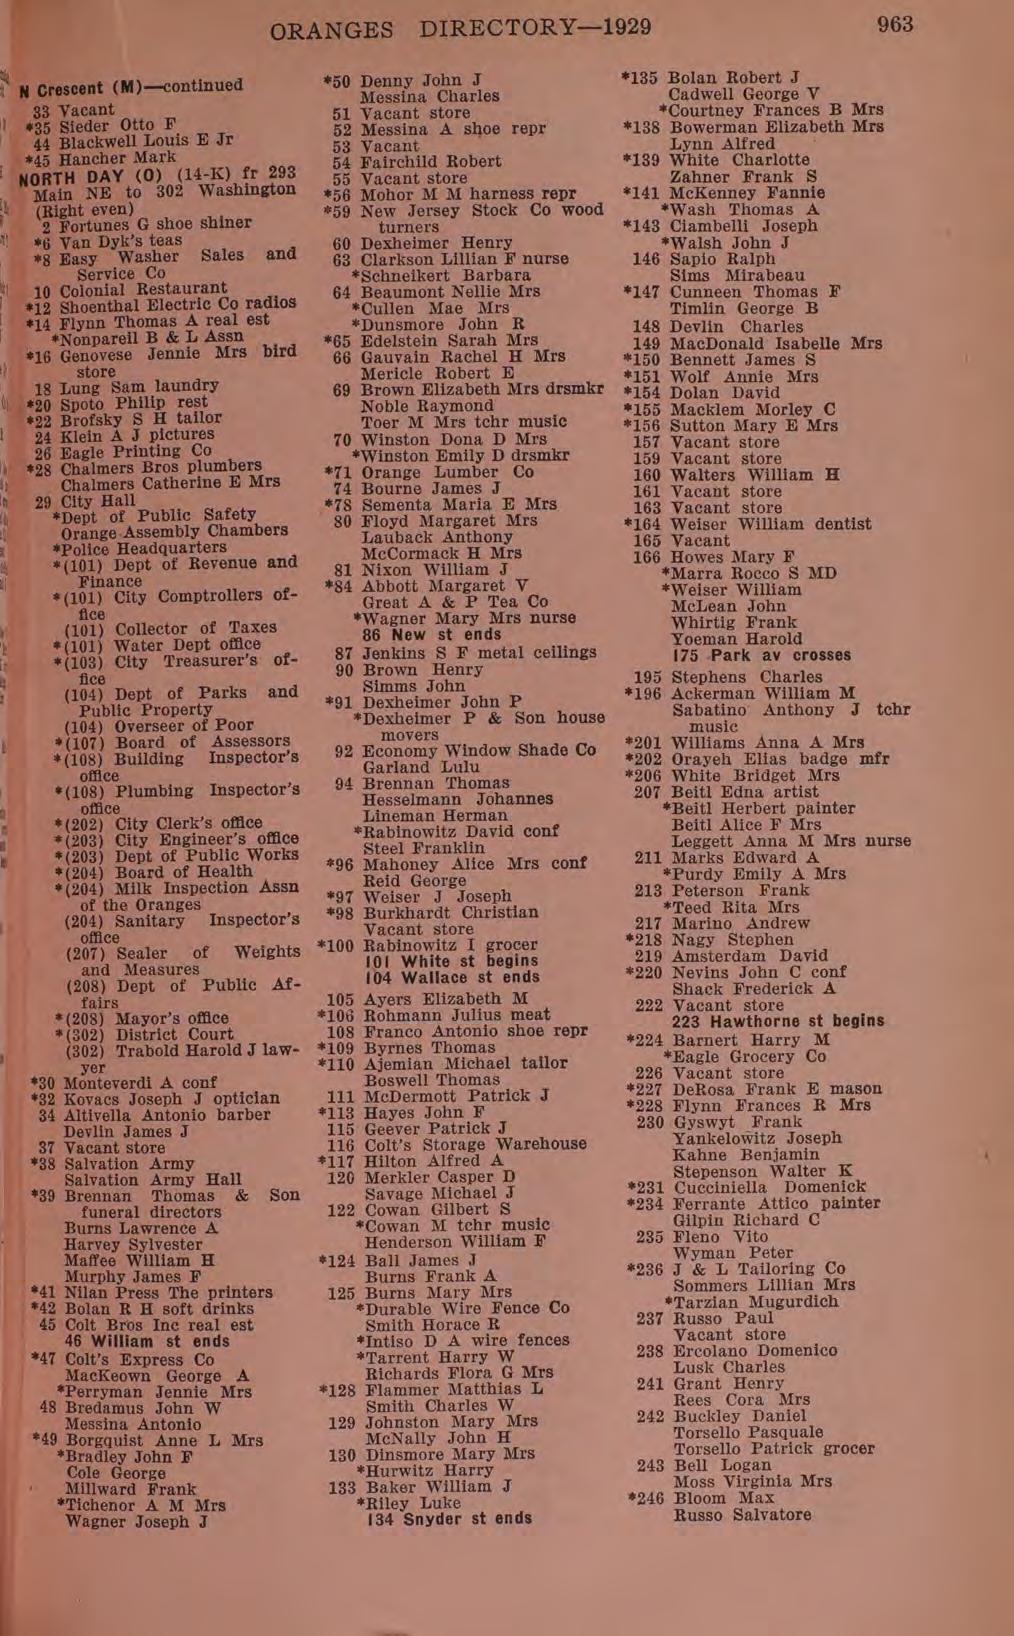 ORANGES DIRECTORY 1929 963 li J NCrescent (M) continued 33 Vacant *35 Sieder Otto F 44 Blackwell Louis E Jr *45 Hancher Mark NORTH DAY (0) (14-K) fr 293 Main NE to 302 Washington (Right even) 2